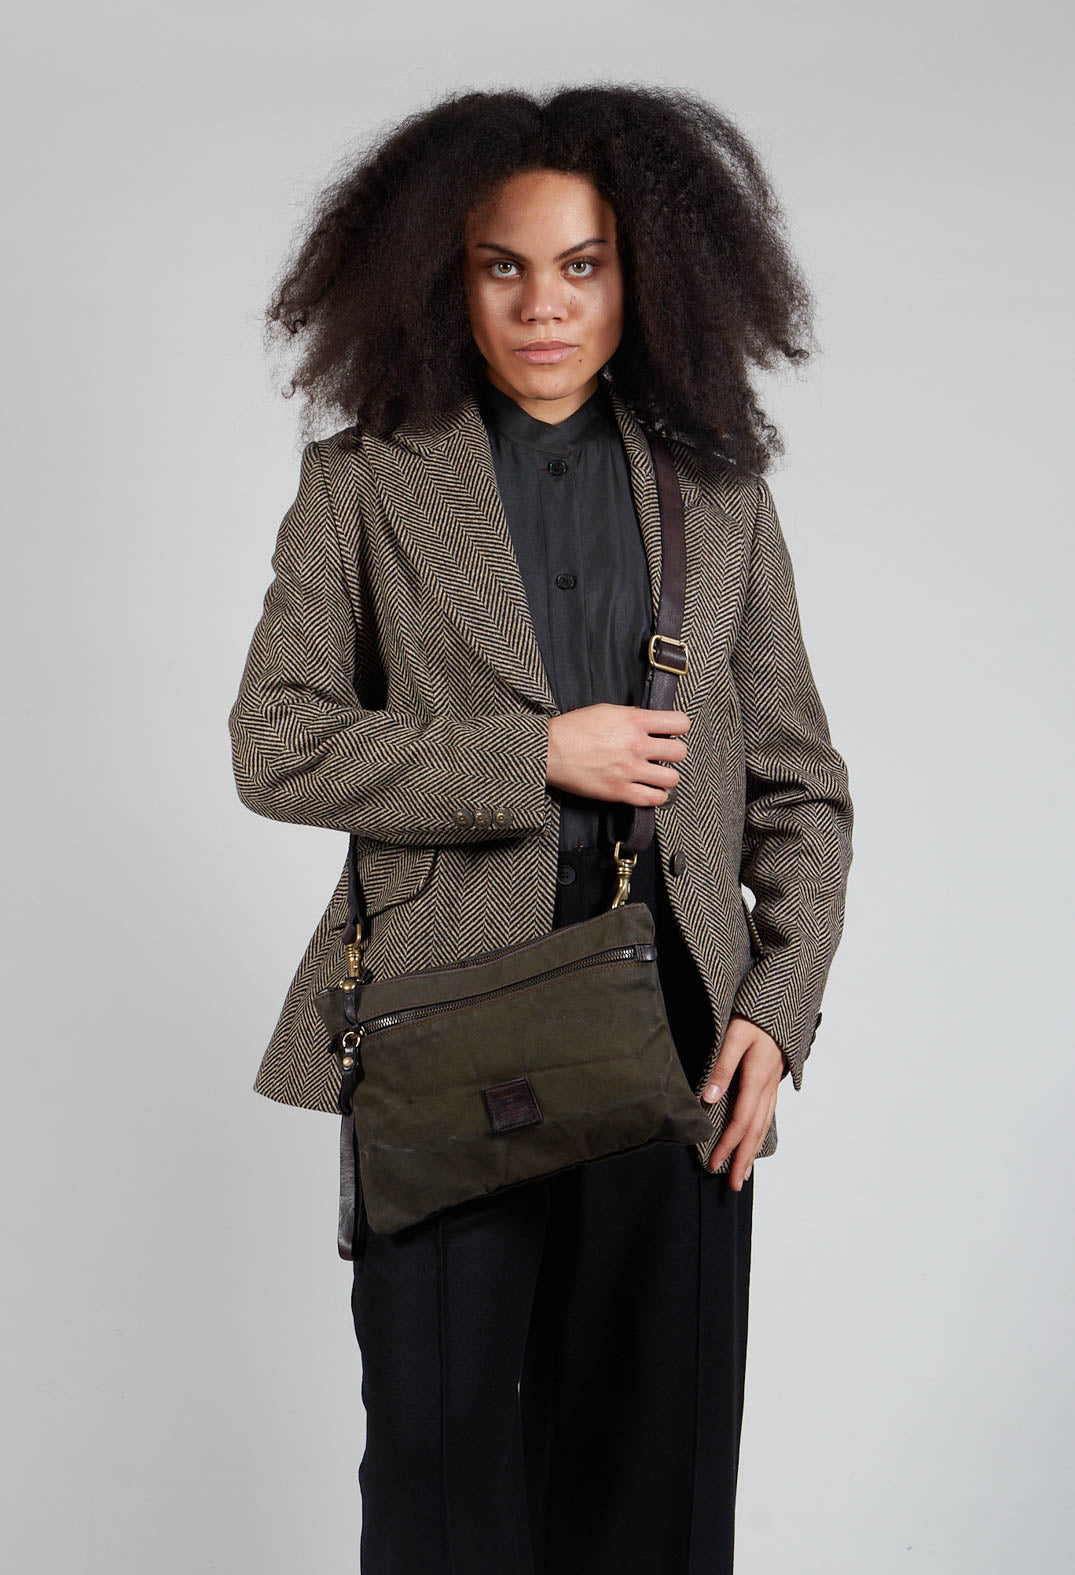 Fabric Bag in Military and Grey